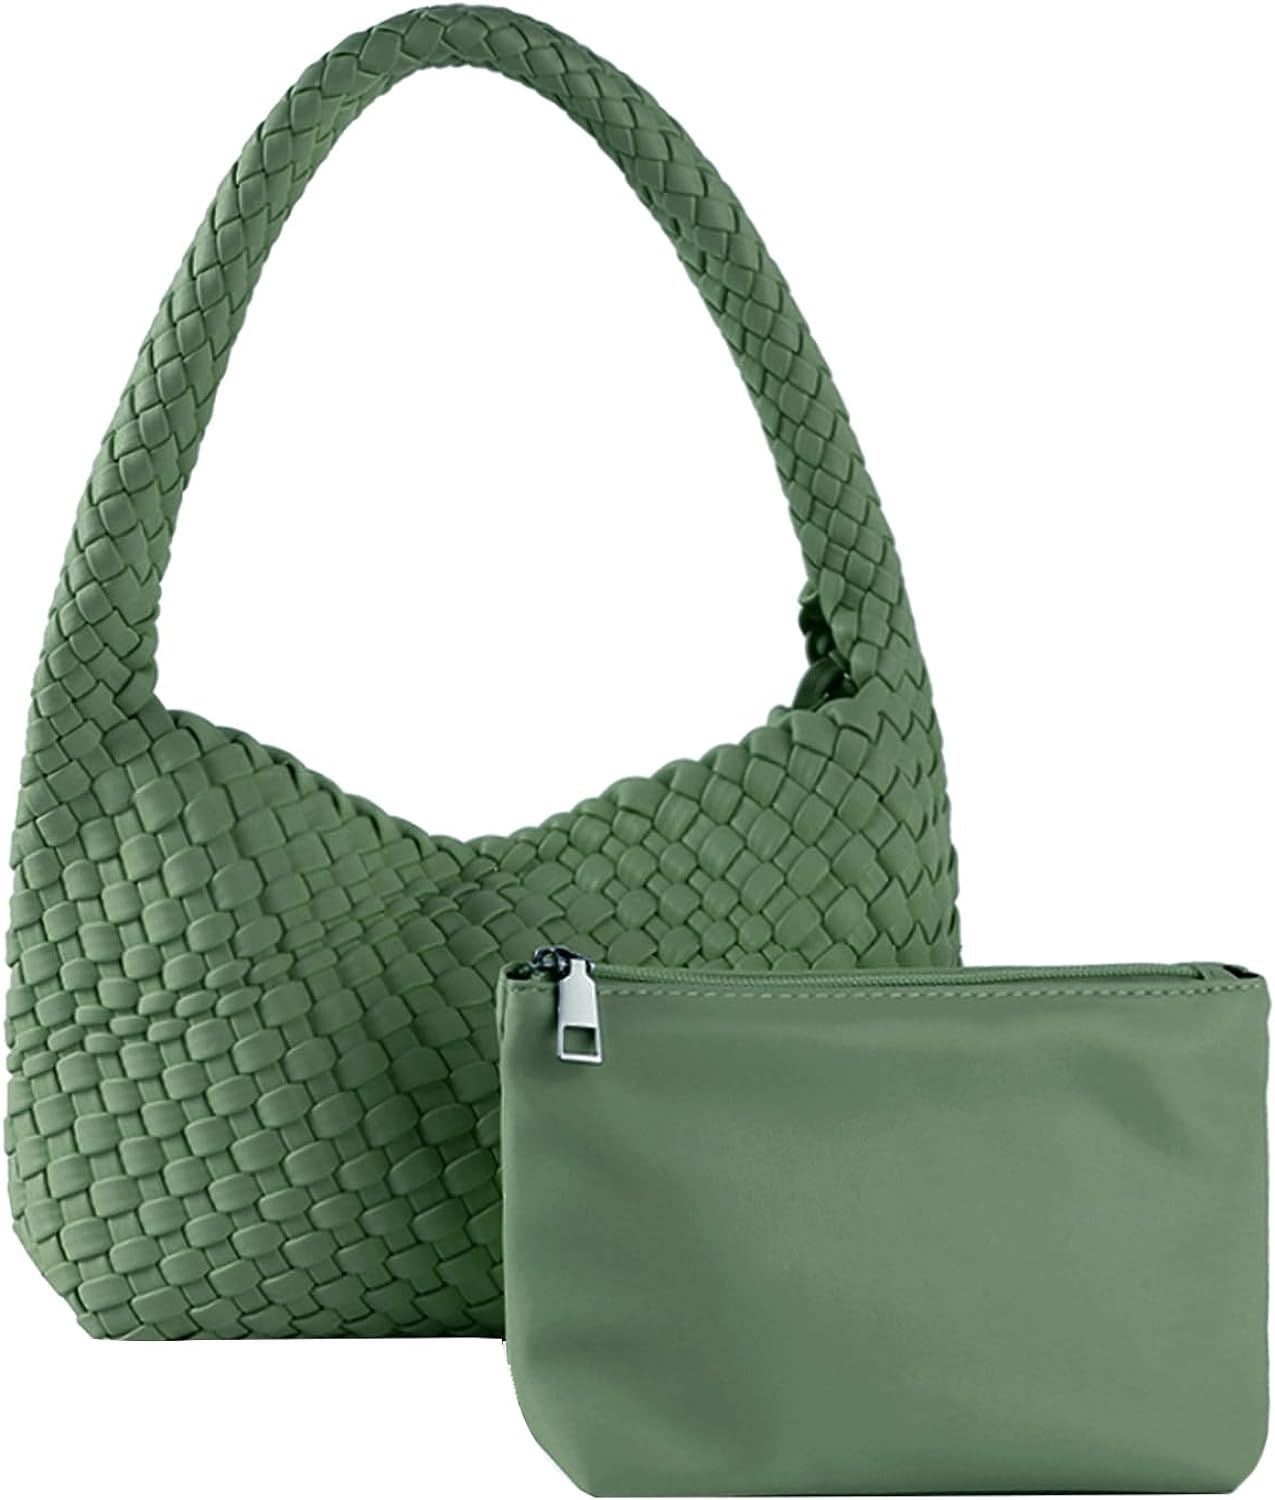 Soledad | Soft Woven Leather Tote - Green / Small - AMVIM